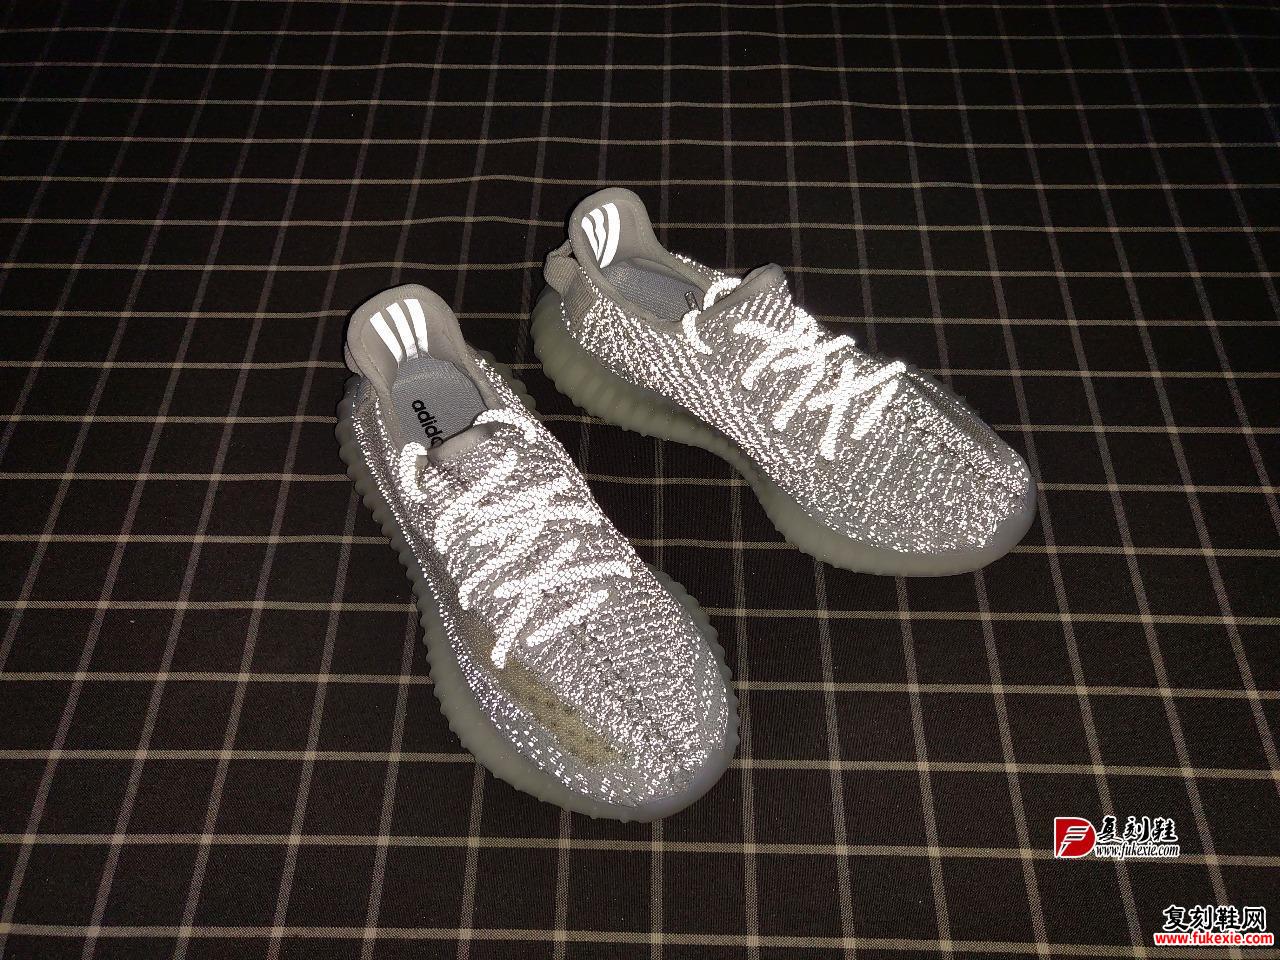 Yeezy 350 Boost V2 “Static Refective” 